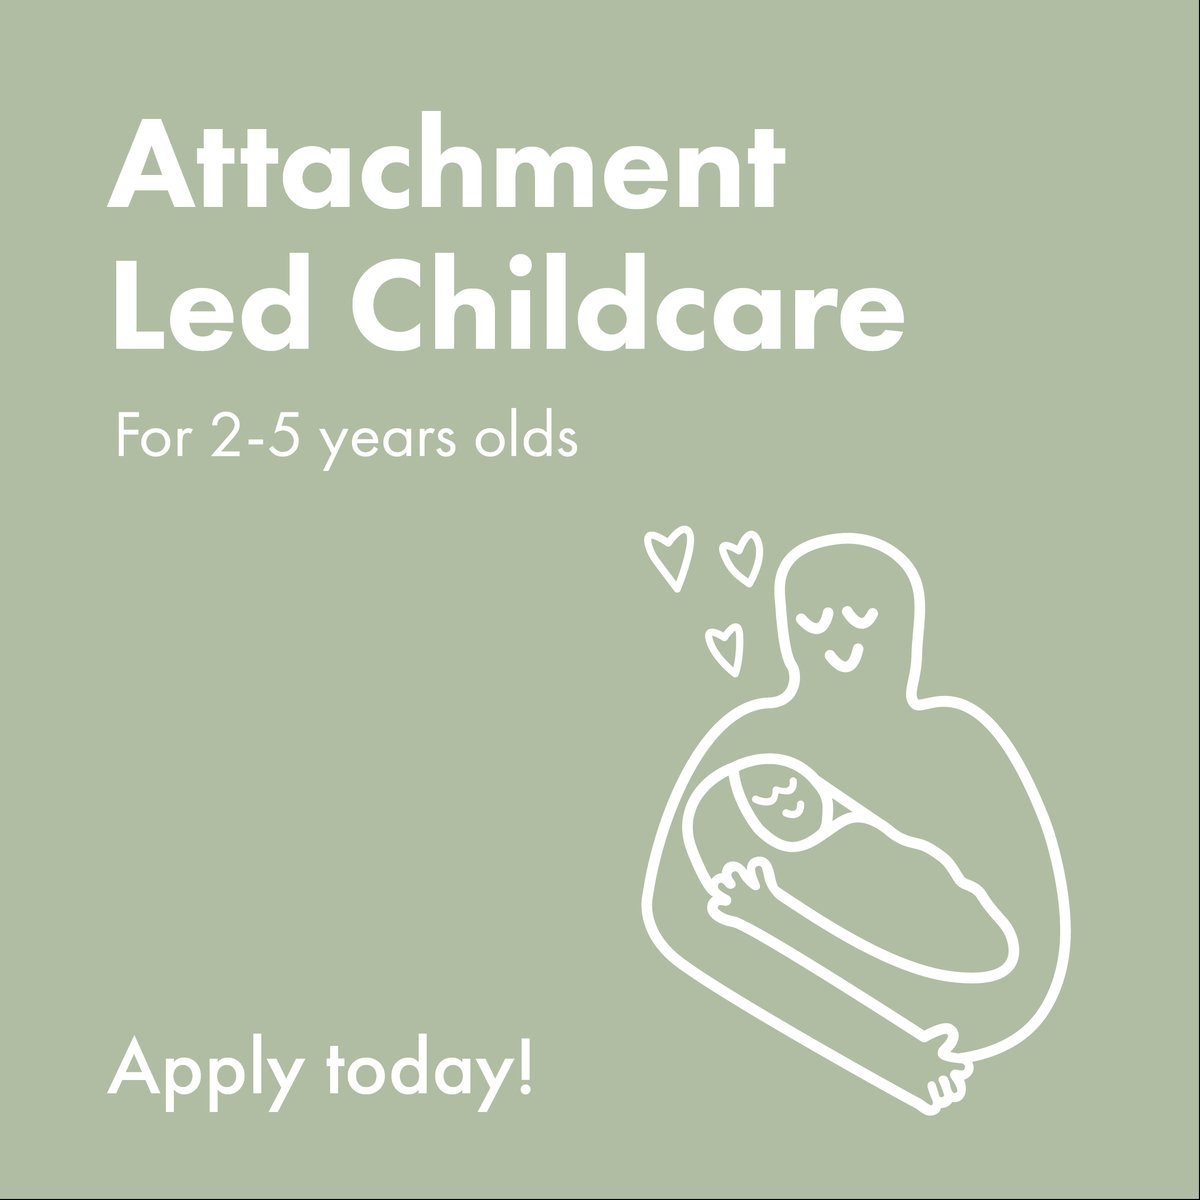 💚 We have spaces for children aged 2-5 at our new nursery, Lullaby Lane at Hogganfield! Blending indoor & outdoor spaces, children can explore & grow, supported by #AttachmentLedPractice, offering cuddles, love & a safe base. 📧hogganfield@lullabylanenursery.co.uk